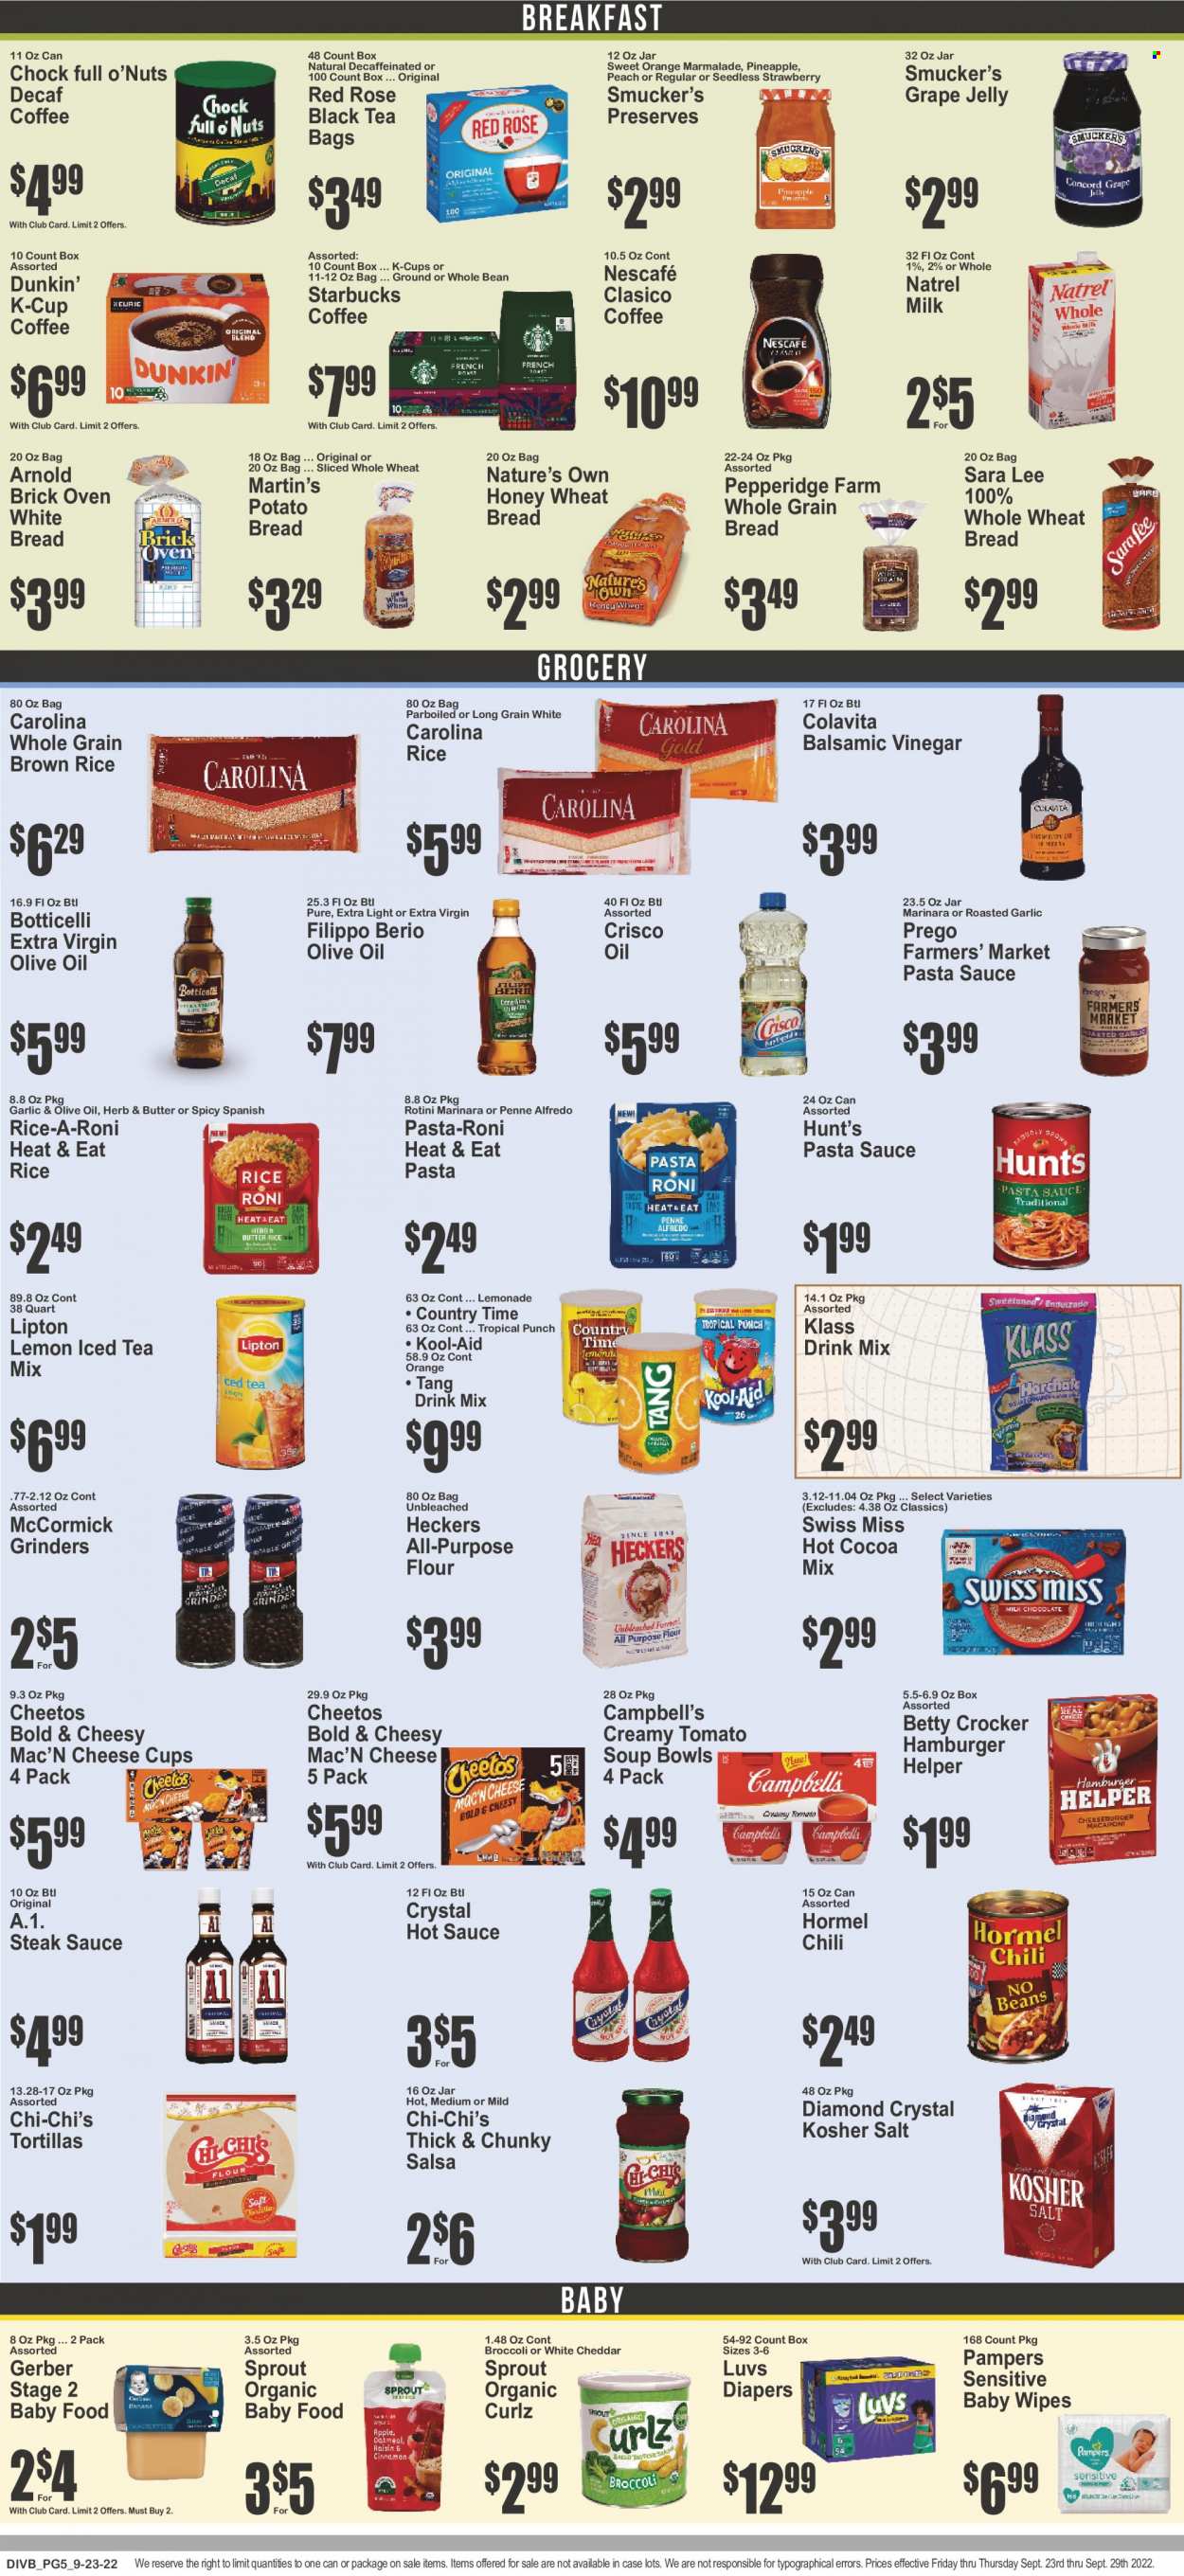 thumbnail - Food Dynasty Flyer - 09/23/2022 - 09/29/2022 - Sales products - tortillas, wheat bread, white bread, Sara Lee, broccoli, pineapple, oranges, Campbell's, tomato soup, pasta sauce, soup, sauce, Hormel, cheddar, cheese cup, cheese, Swiss Miss, milk, butter, jelly, Gerber, Cheetos, Crisco, brown rice, rice, penne, steak sauce, hot sauce, salsa, balsamic vinegar, extra virgin olive oil, vinegar, olive oil, oil, grape jelly, lemonade, Lipton, Country Time, fruit punch, hot cocoa, tea bags, coffee, Starbucks, Nescafé, coffee capsules, K-Cups, rosé wine, organic baby food, steak, wipes, Pampers, baby wipes, nappies, rose, Nature's Own. Page 5.